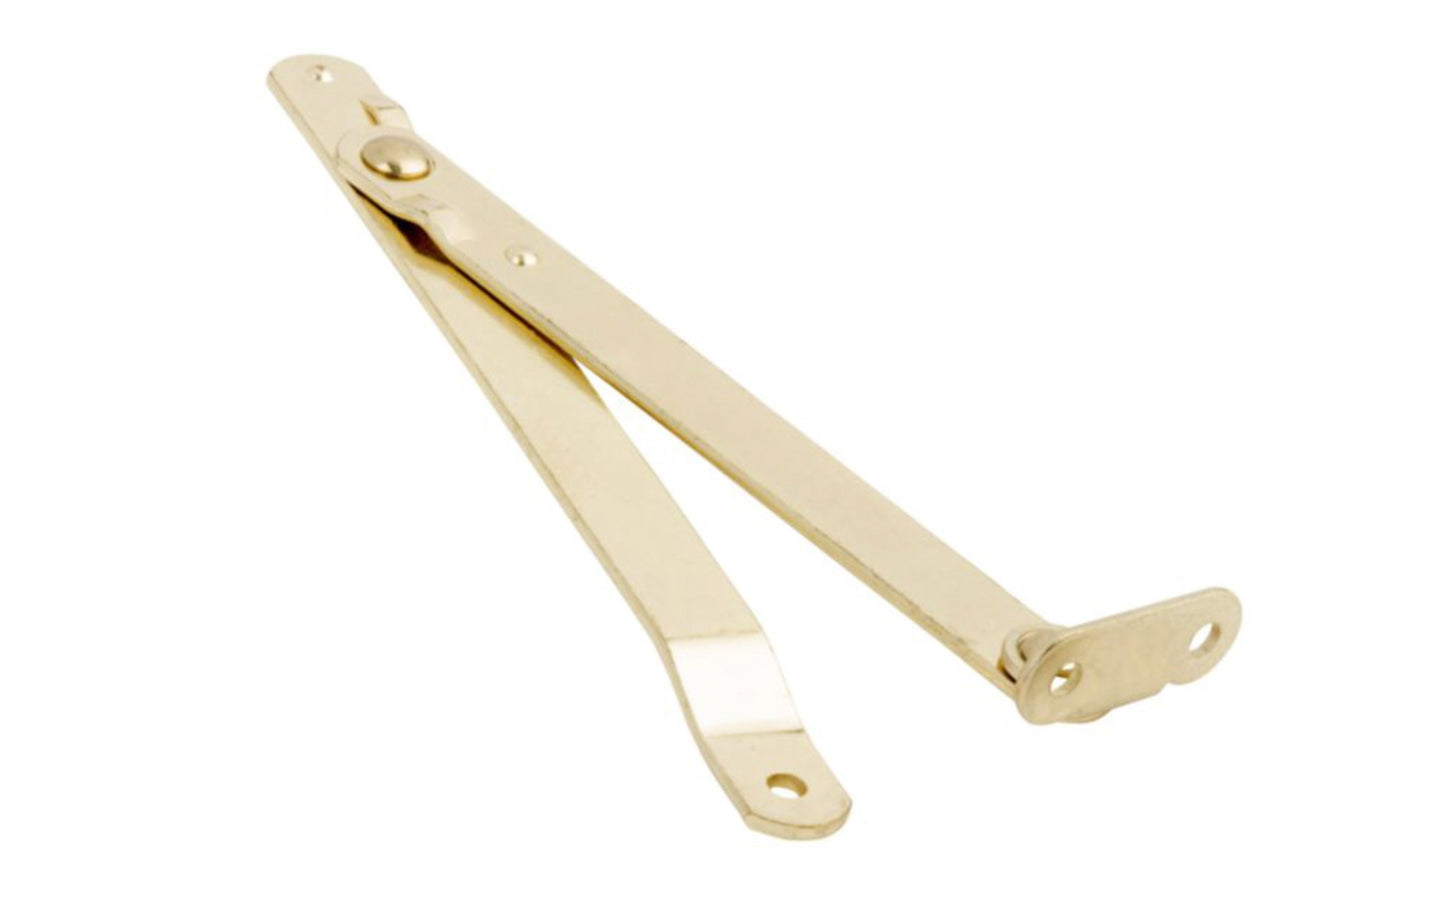 This brass-plated steel folding support is designed to support table legs, shelves, chest lids, & more. Prevents lid from slamming. Designed for right side mounting. National Hardware Model No. N208-629. Brass-Plated Steel Folding Support - Right Side. 038613208629